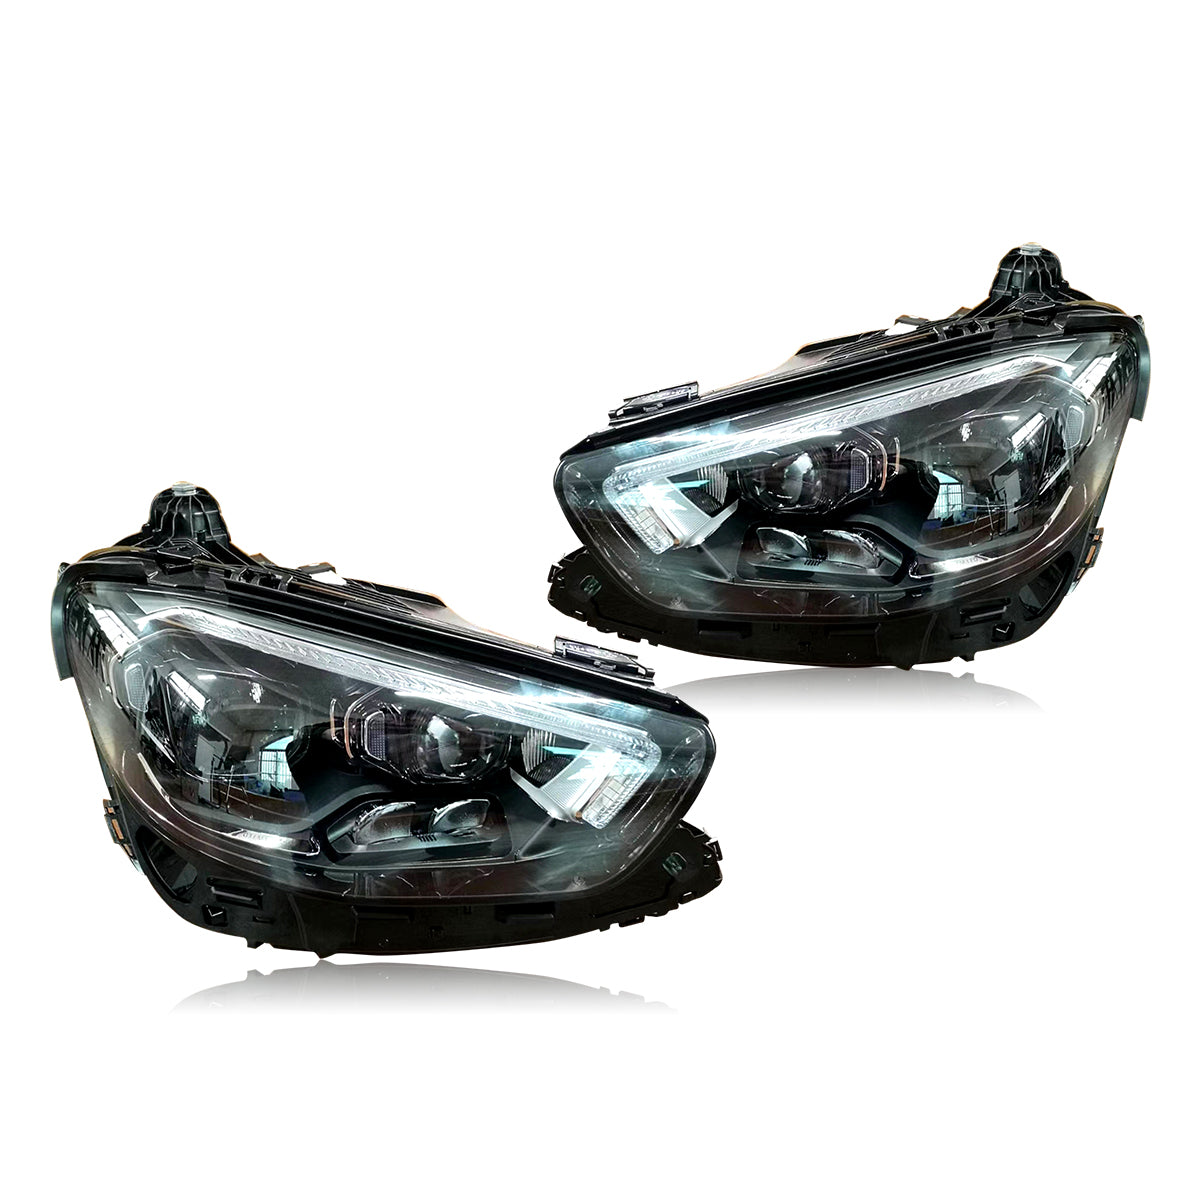 The headlight for Mercedes E-class W213 2021 low-profile upgrade to high profile